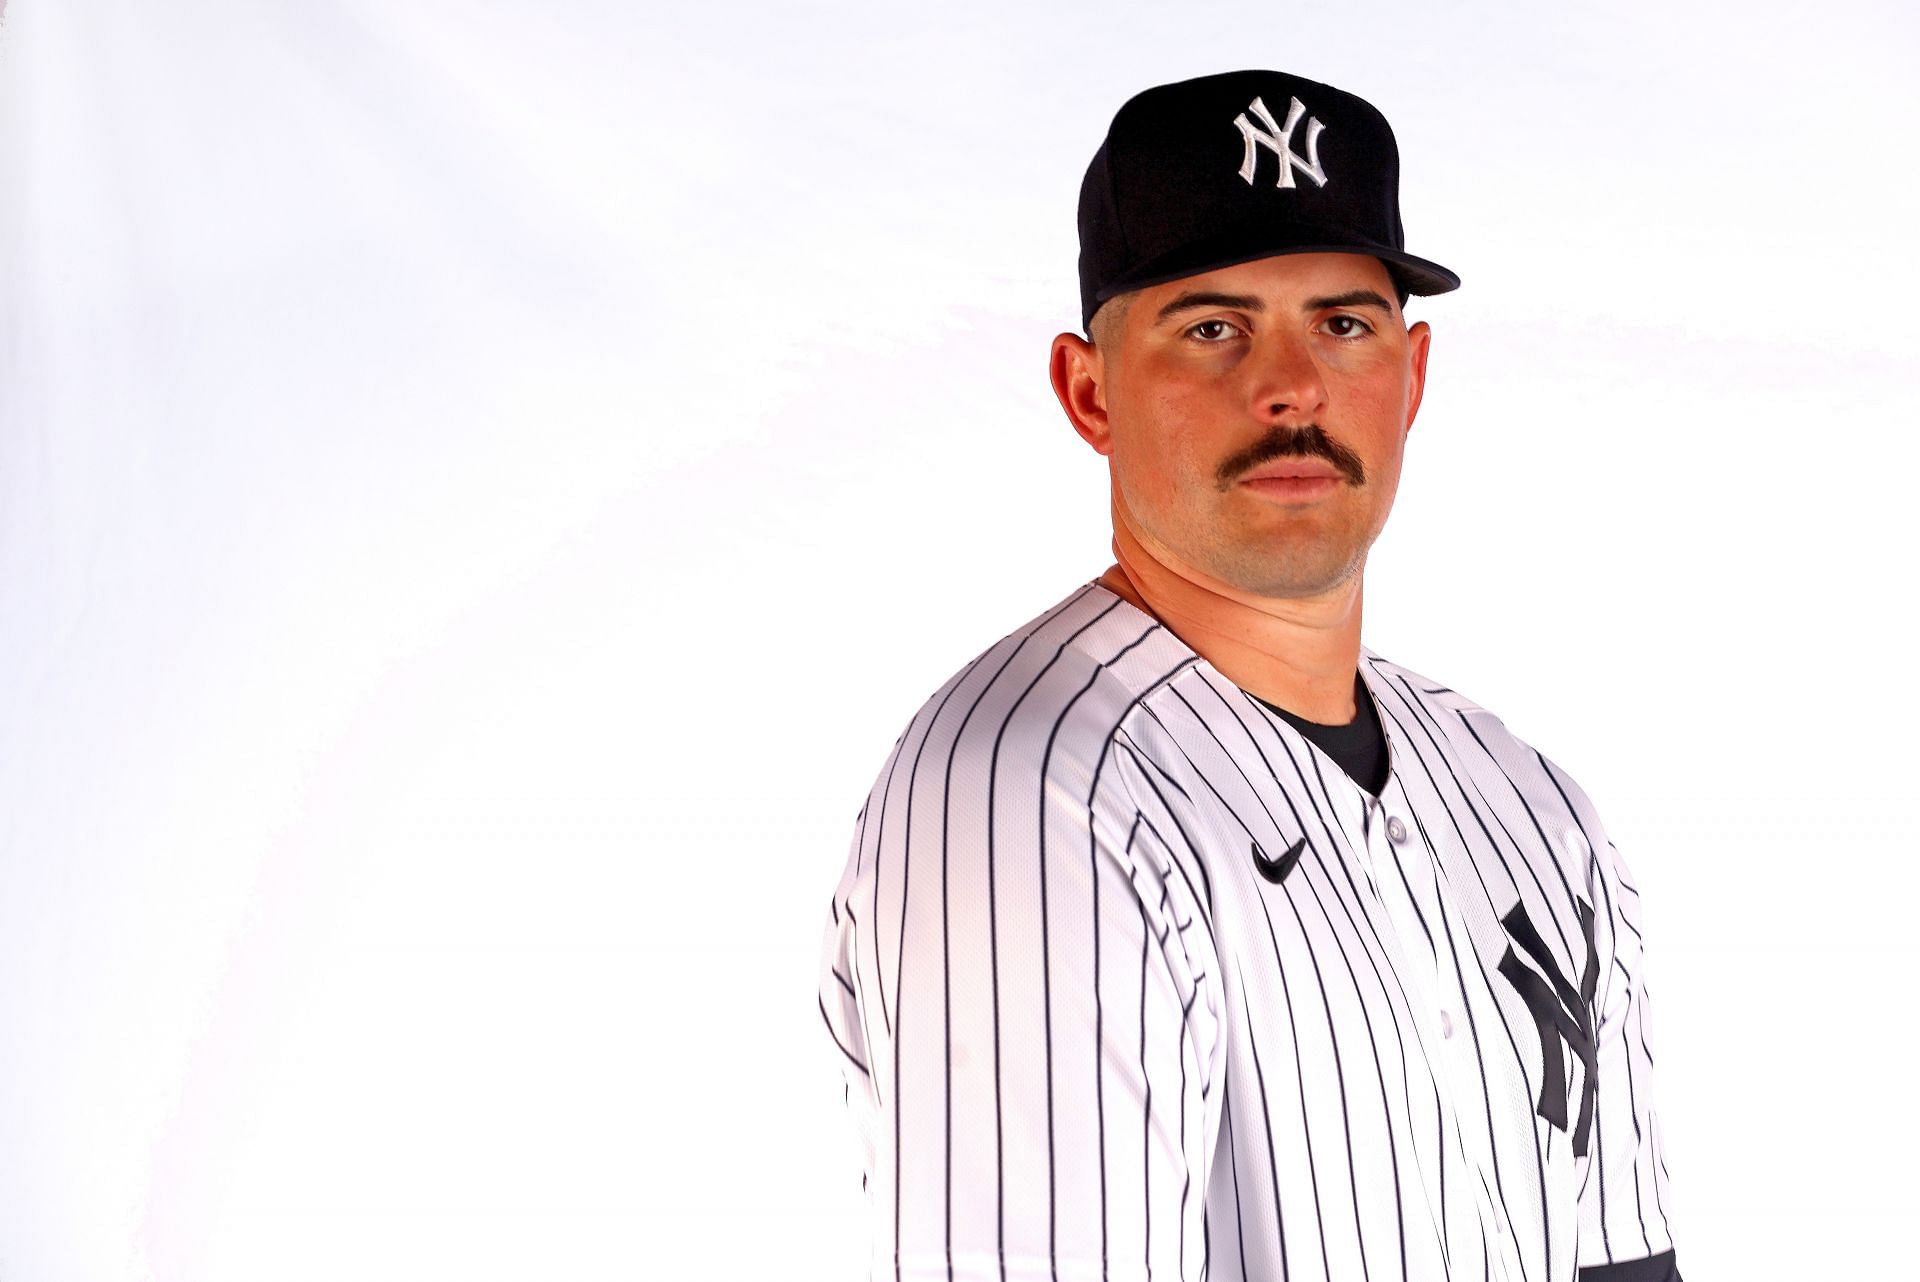 Proof that Carlos Rodon was destined to pitch for the Yankees